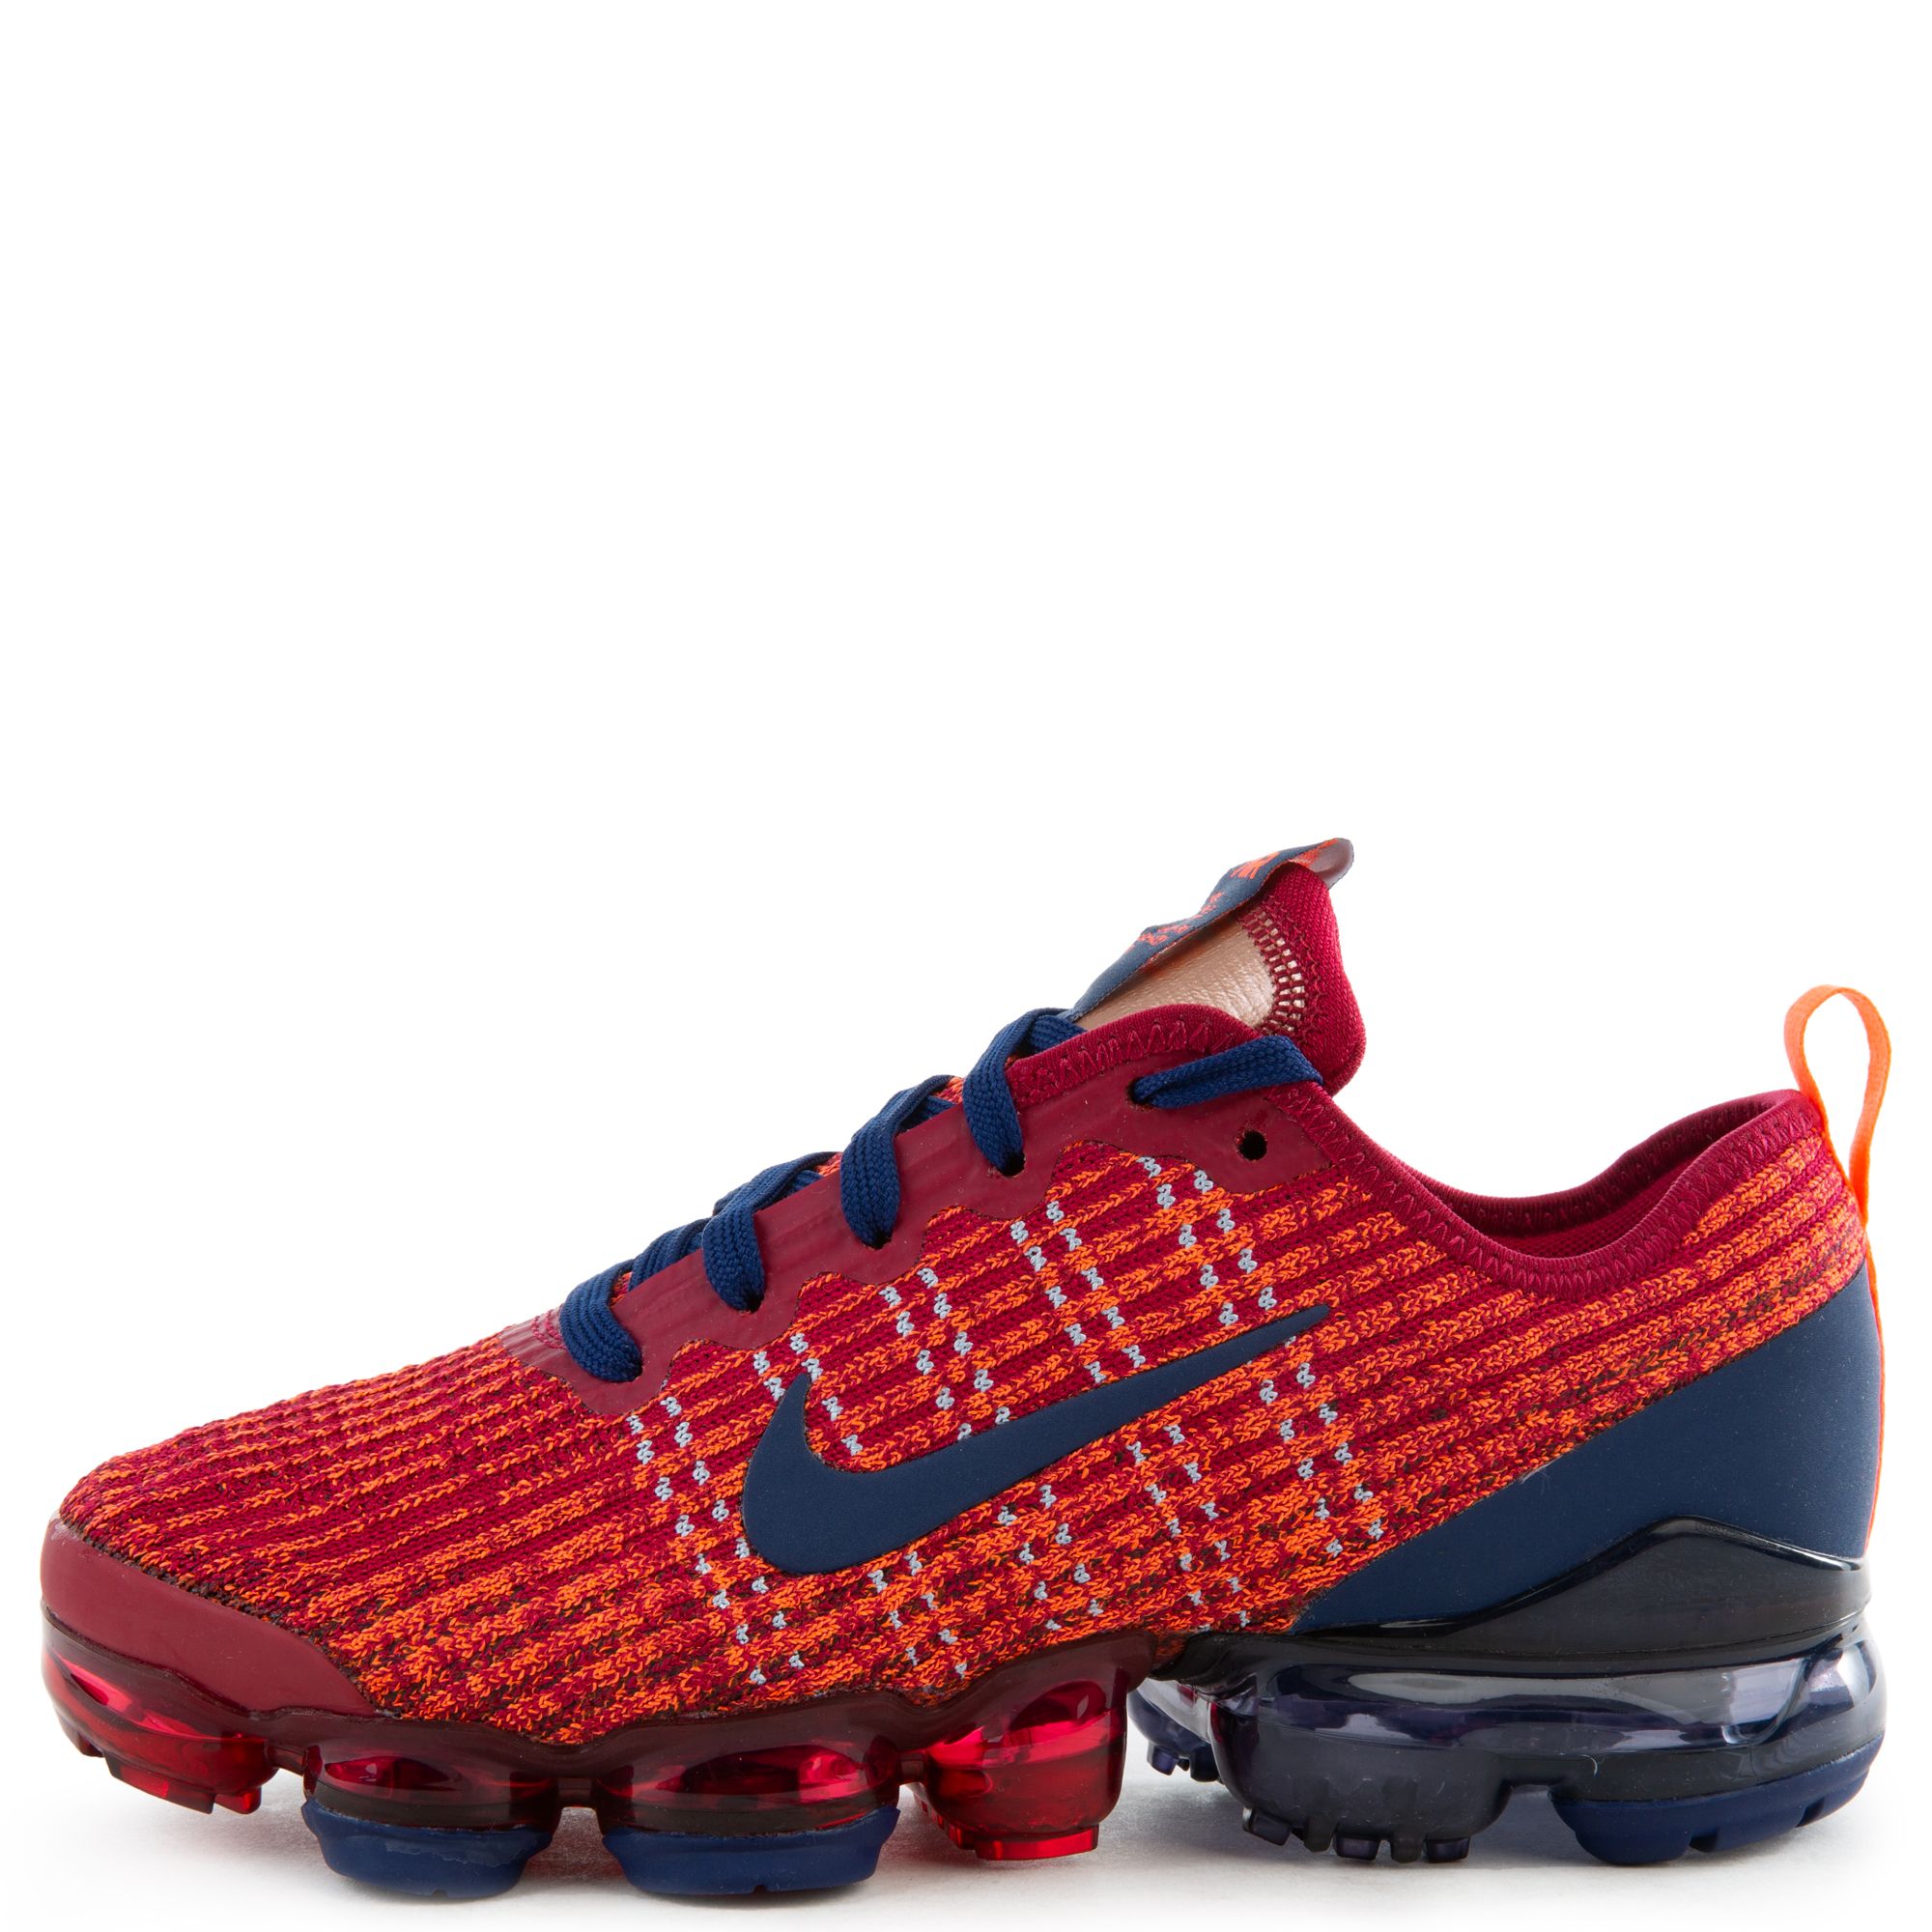 red and blue air vapormax